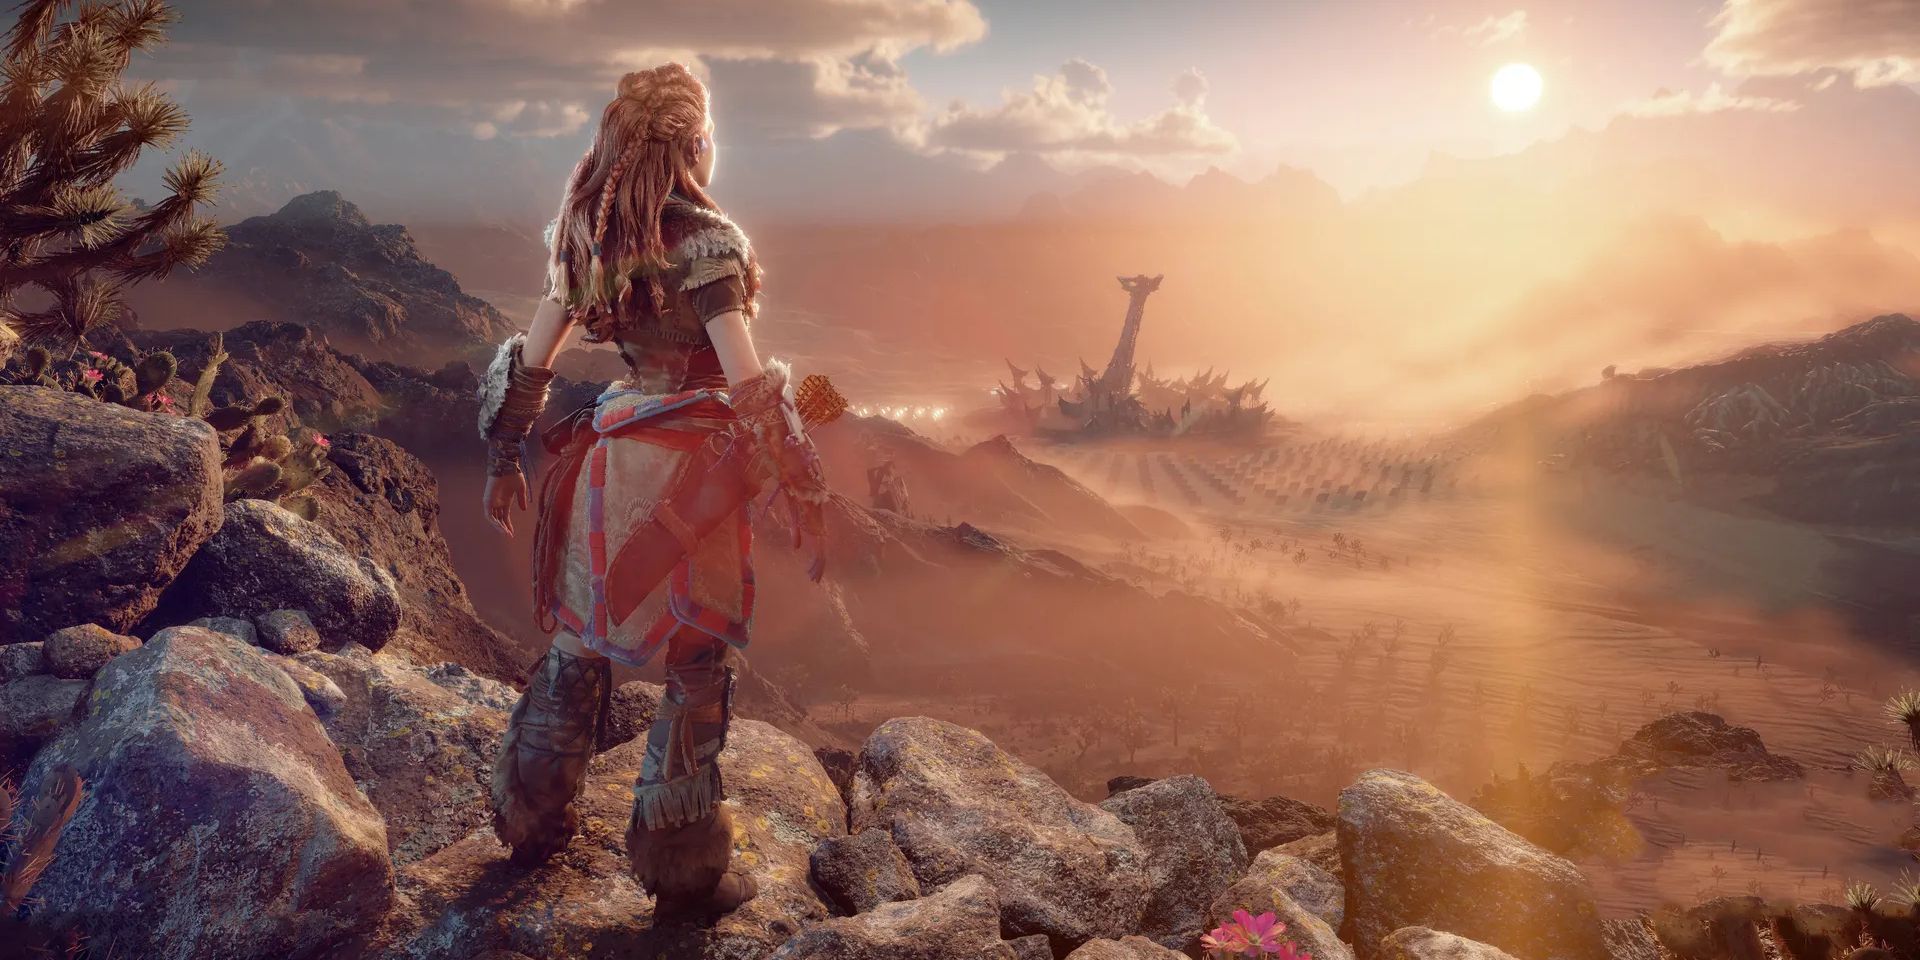 Aloy, standing on a rocky ridge, watches the sun rise or set over a desert landscape in Horizon Forbidden West